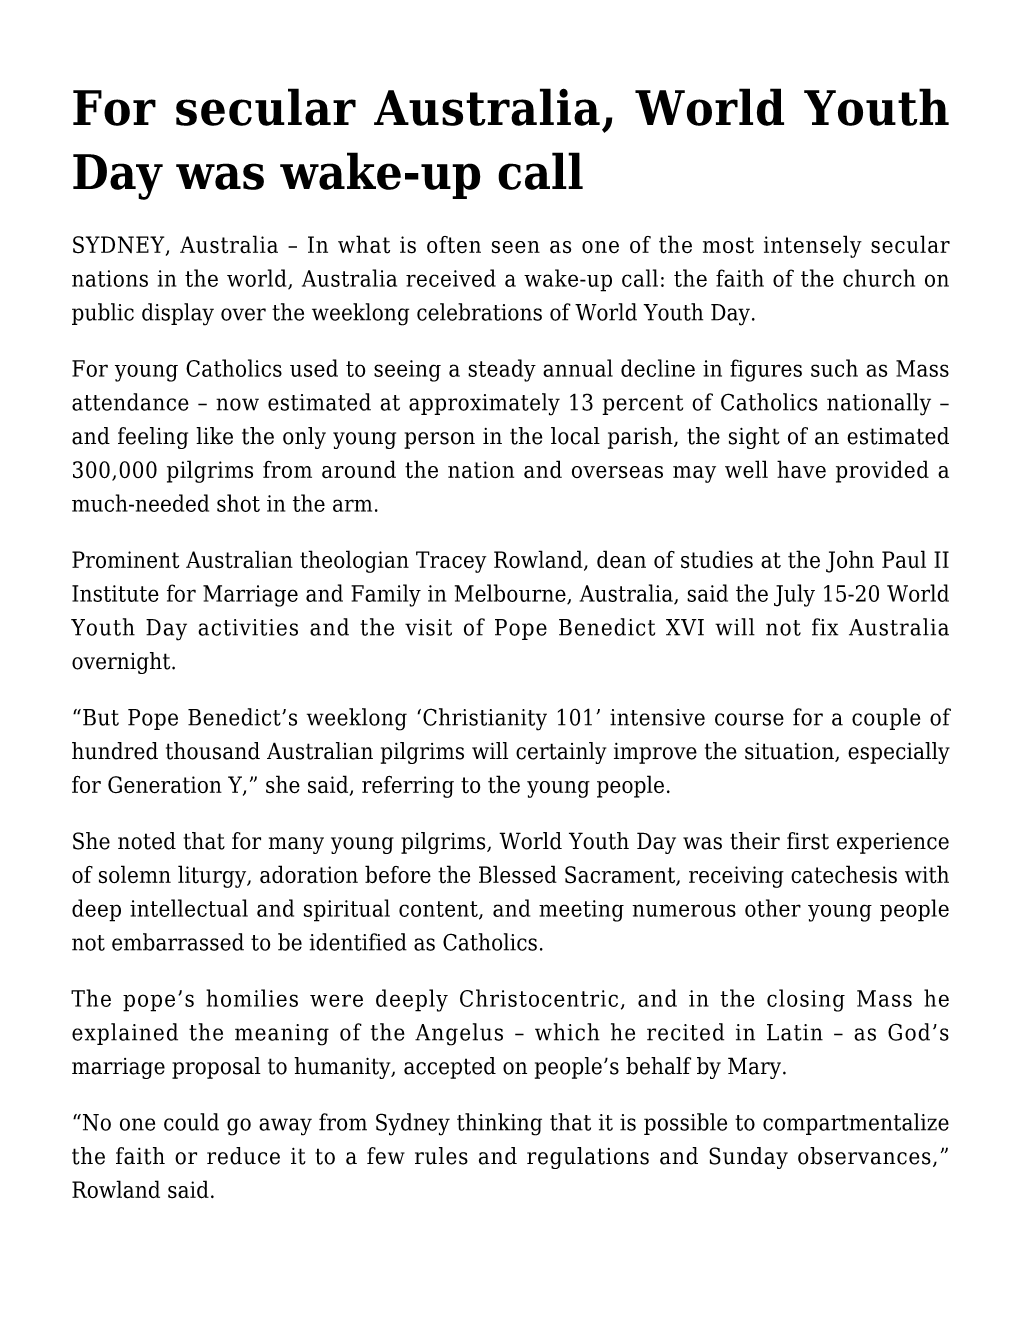 For Secular Australia, World Youth Day Was Wake-Up Call